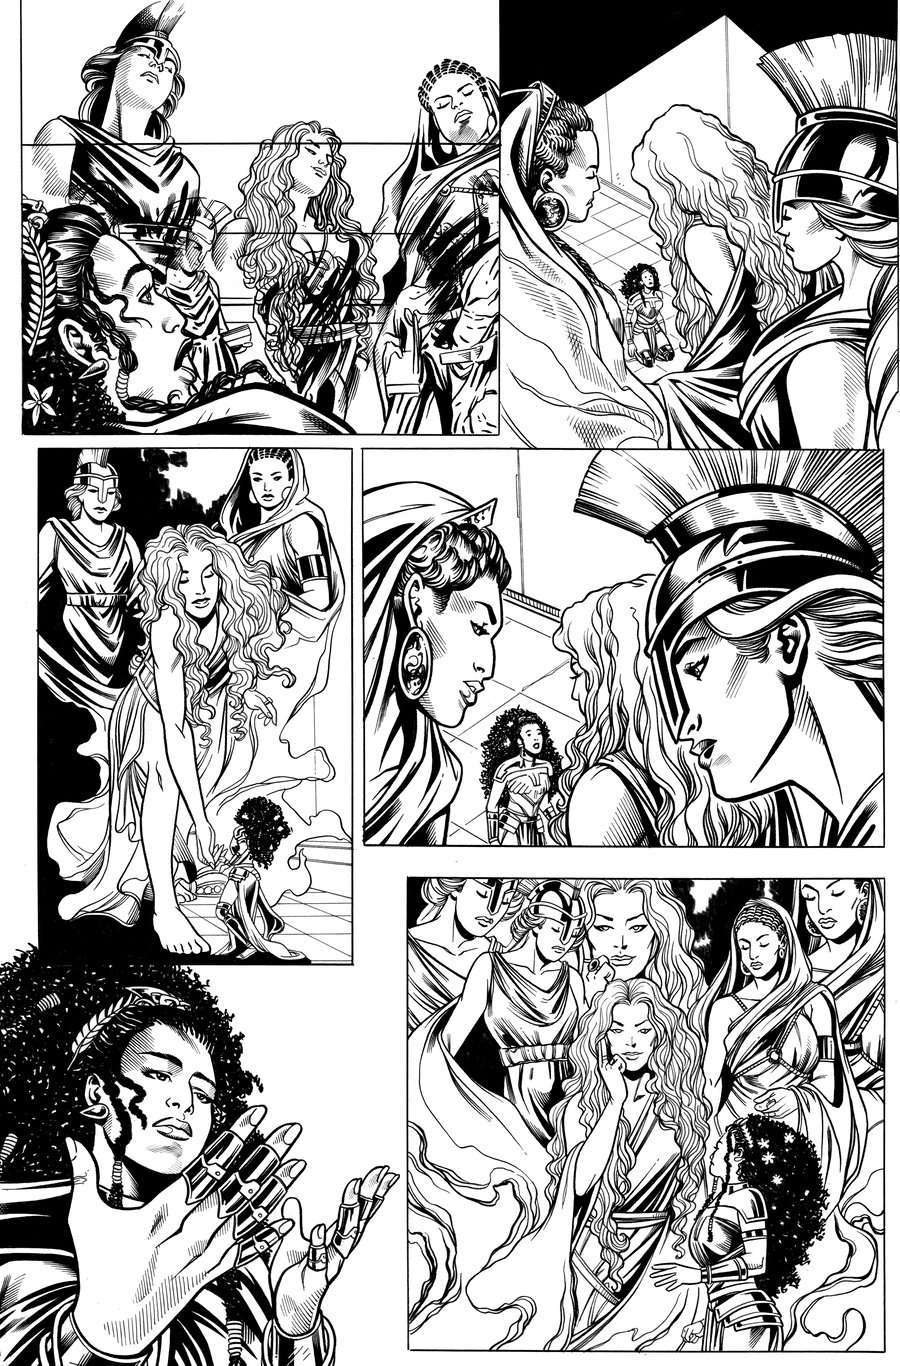 Image of Nubia and the Amazons #2 PG 2